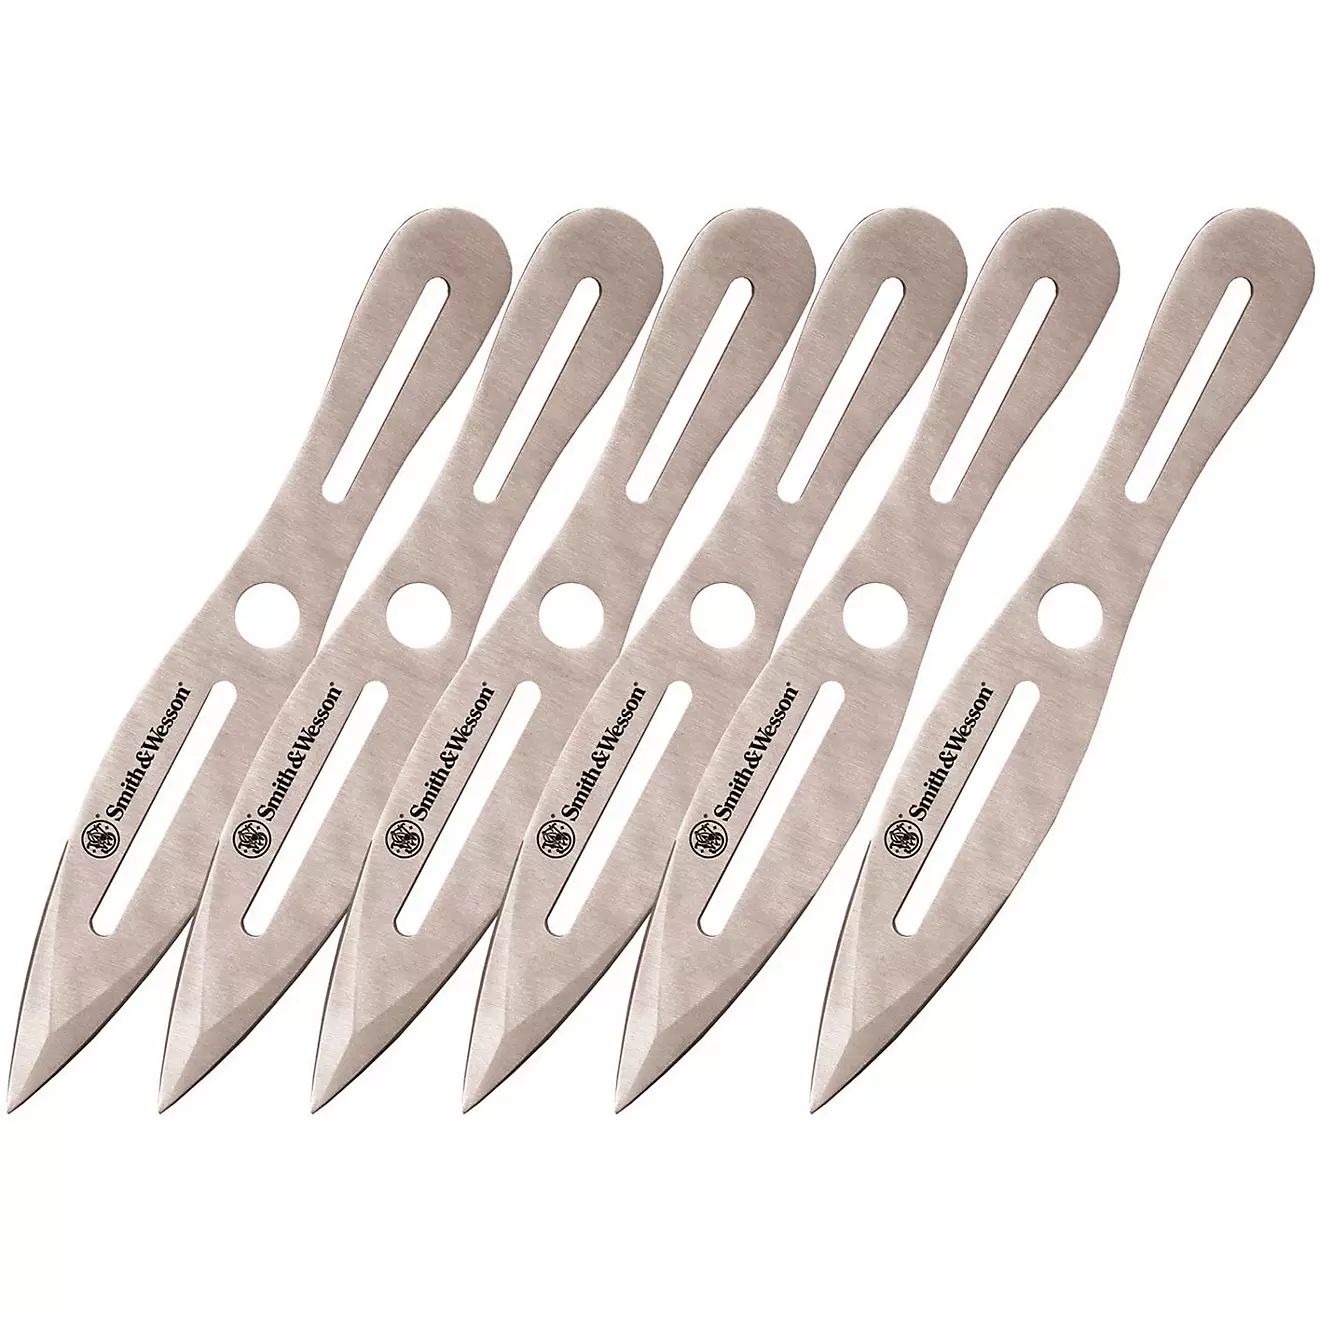 Smith & Wesson Throwing Knives 6-Pack | Academy Sports + Outdoors